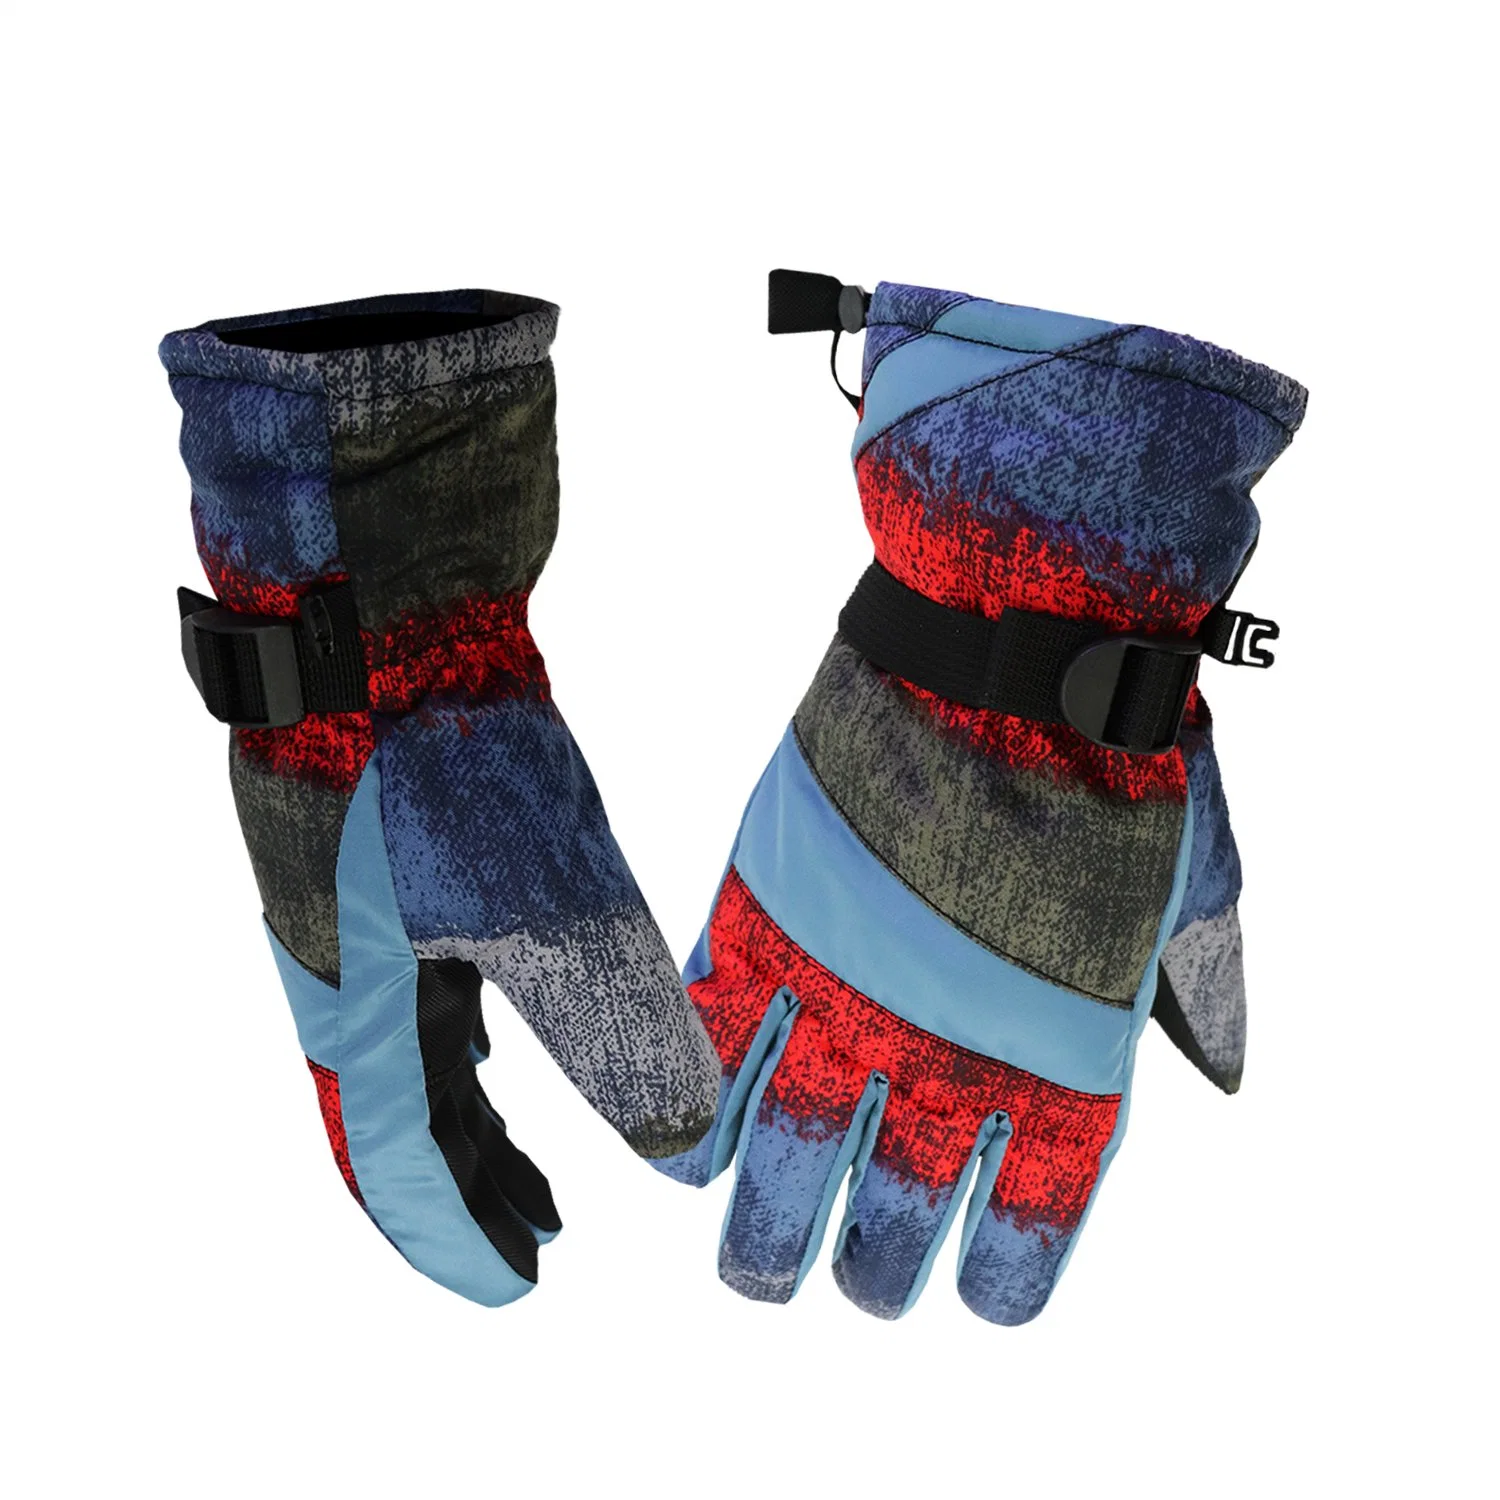 Warm Winter Gloves Multi-Purpose Ski Gloves Outdoor Sports Daily Use